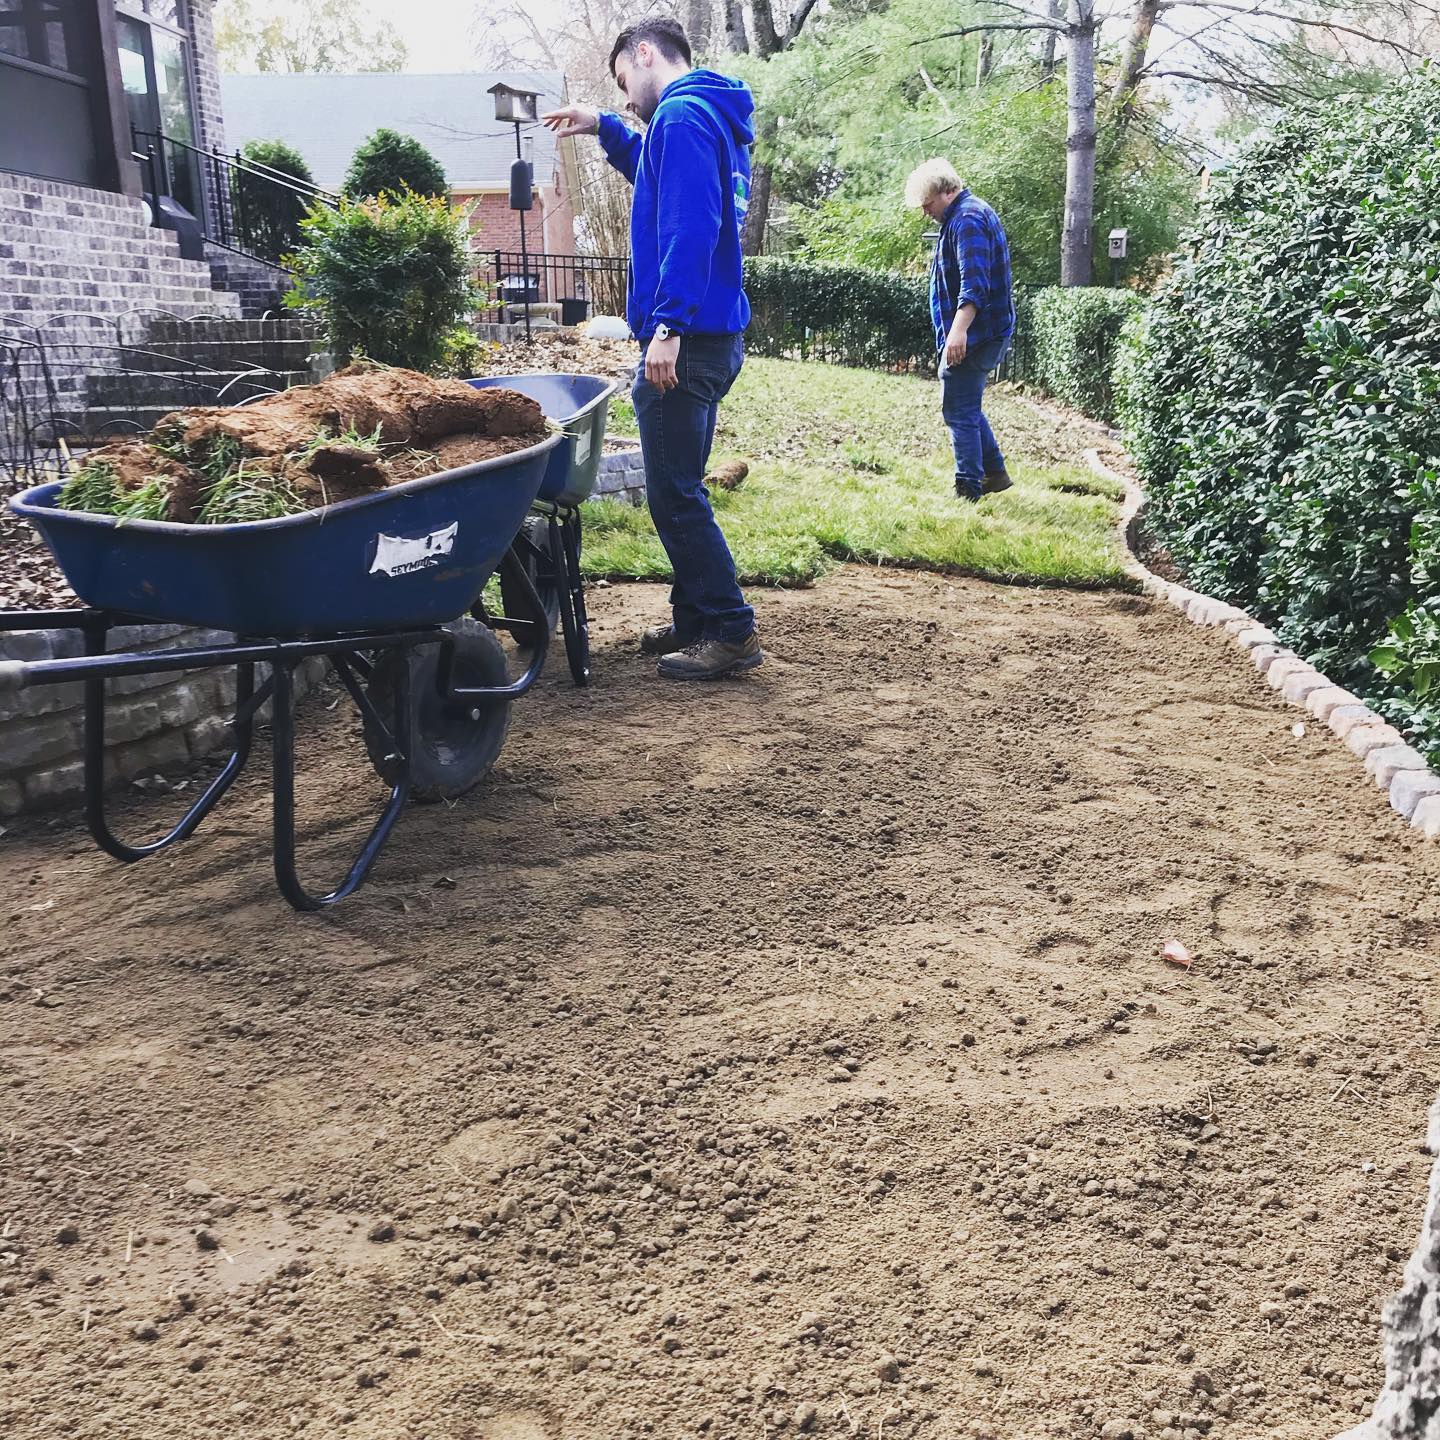 Clarksville TN Landscaping Services